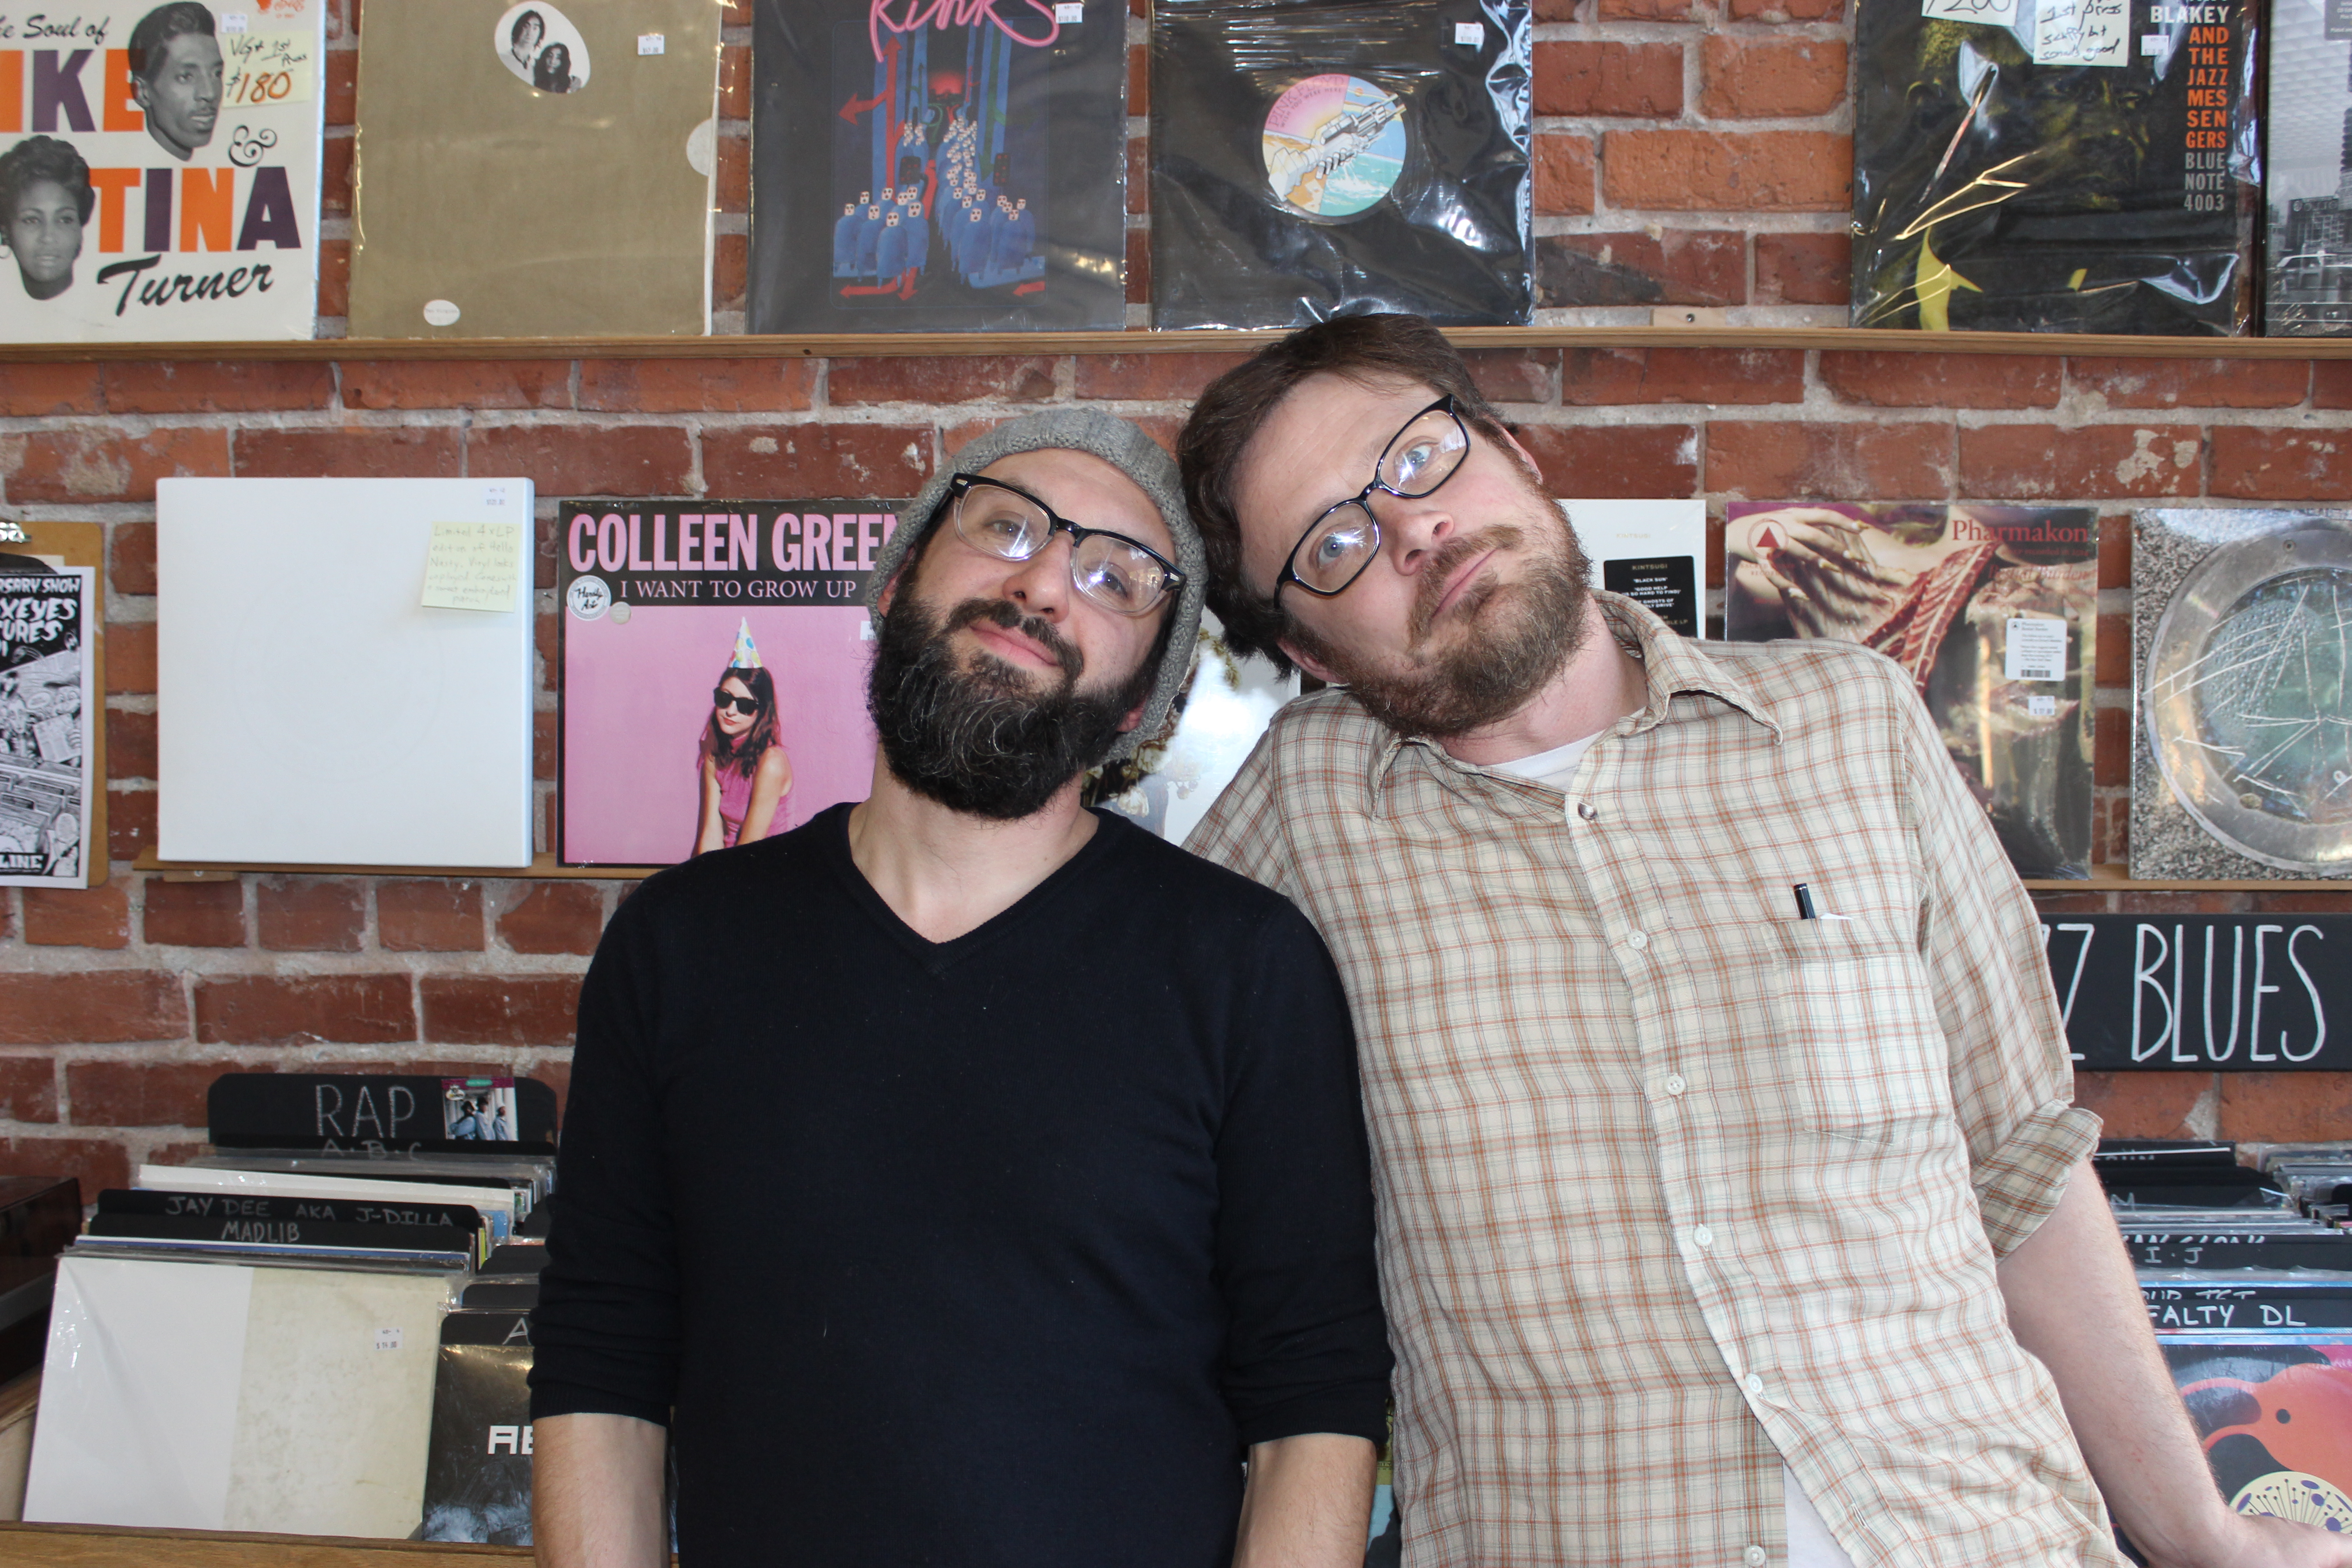 Spin Cycle owner Jason Grimes and veteran clerk Danny Noonan. Photo/GIFs by Kelton Sears